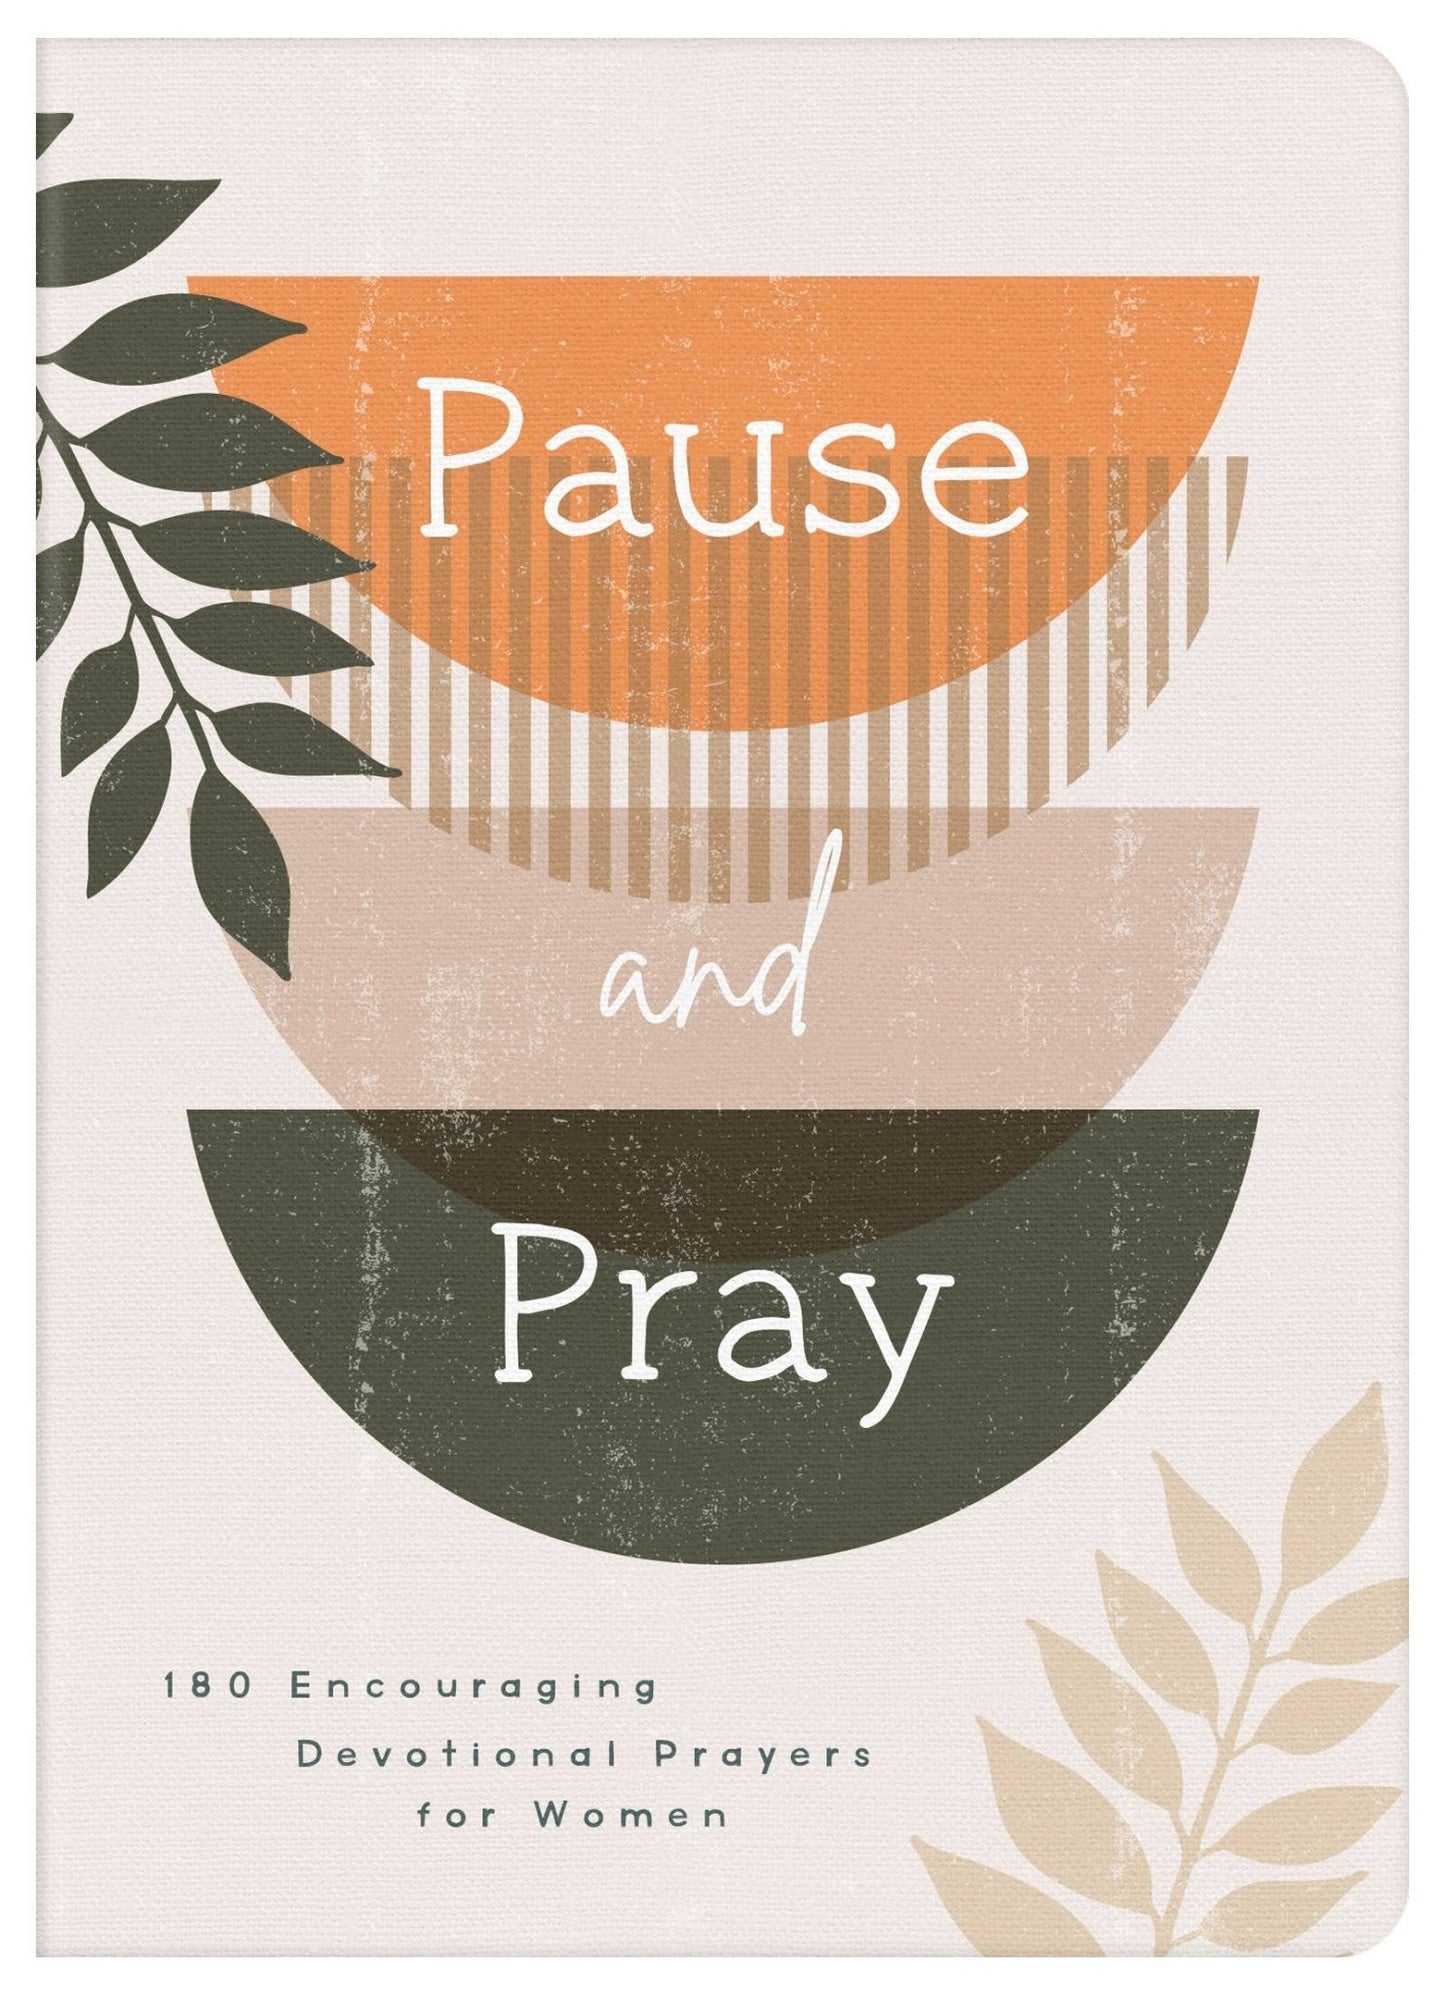 Pause and Pray: 180 Encouraging Devotional Prayers for Women | 2FruitBearers